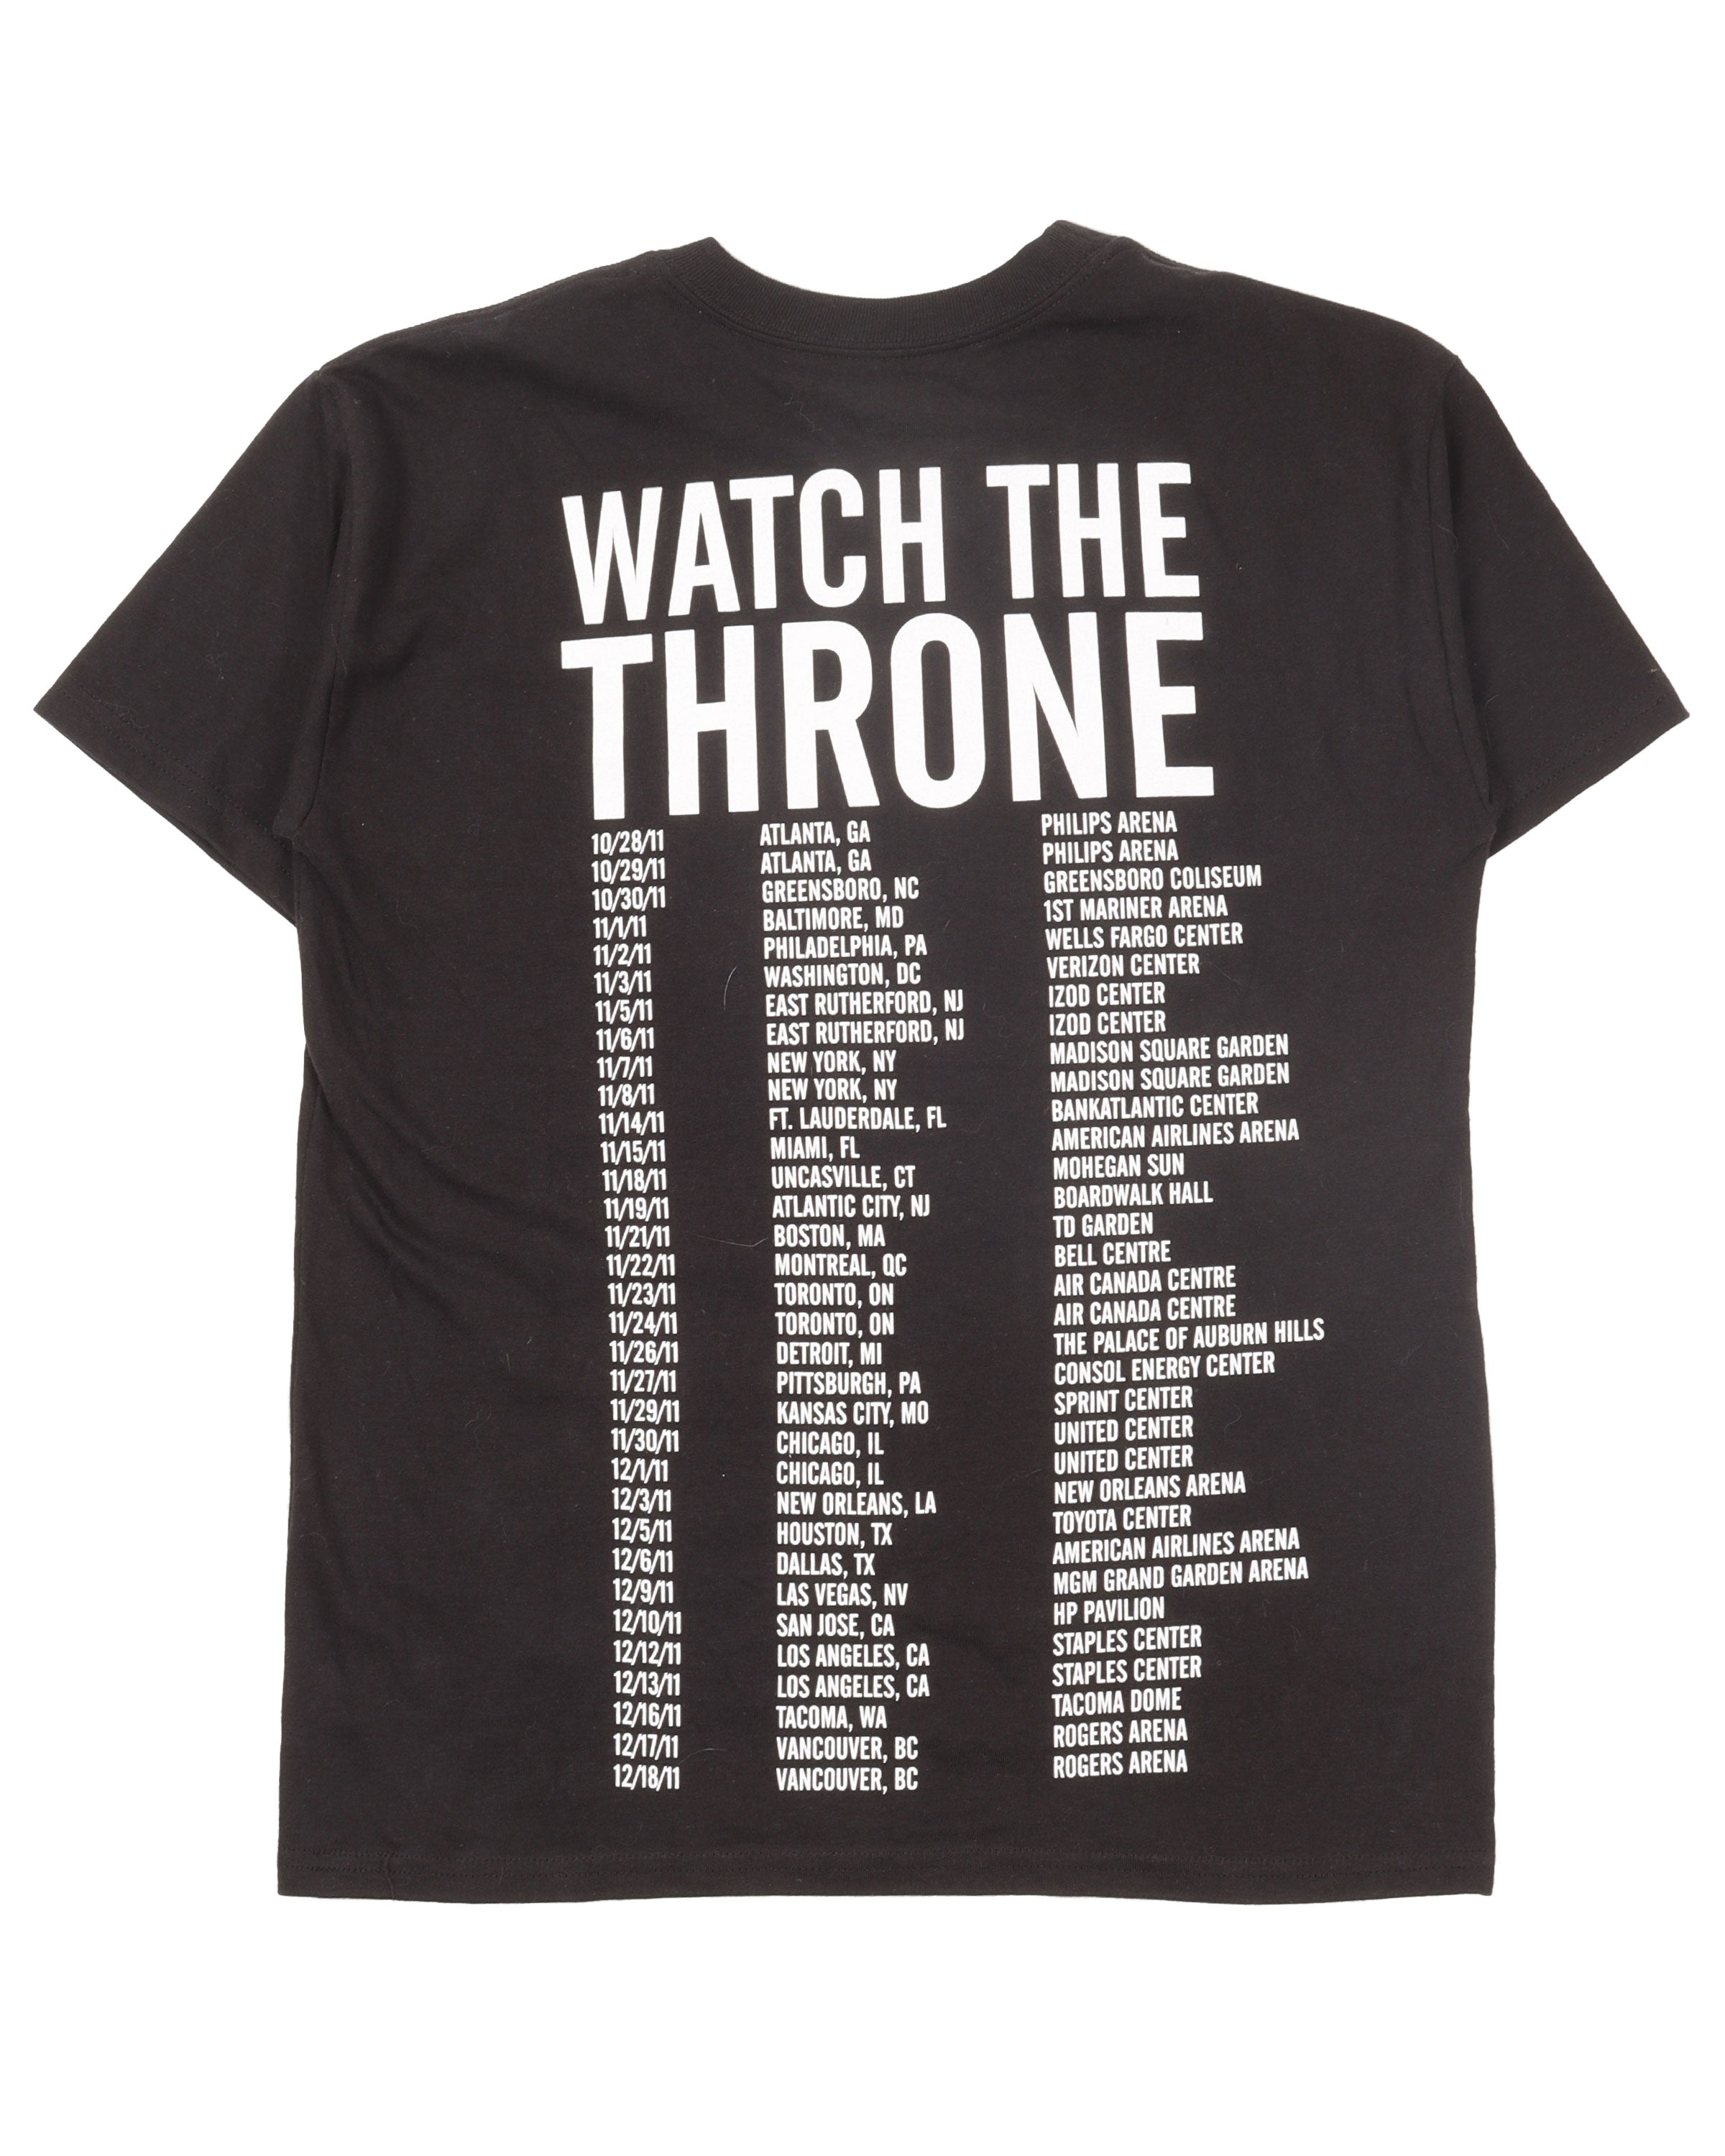 Vintage Jay-Z Kanye West Watch The Throne Tour T-Shirt